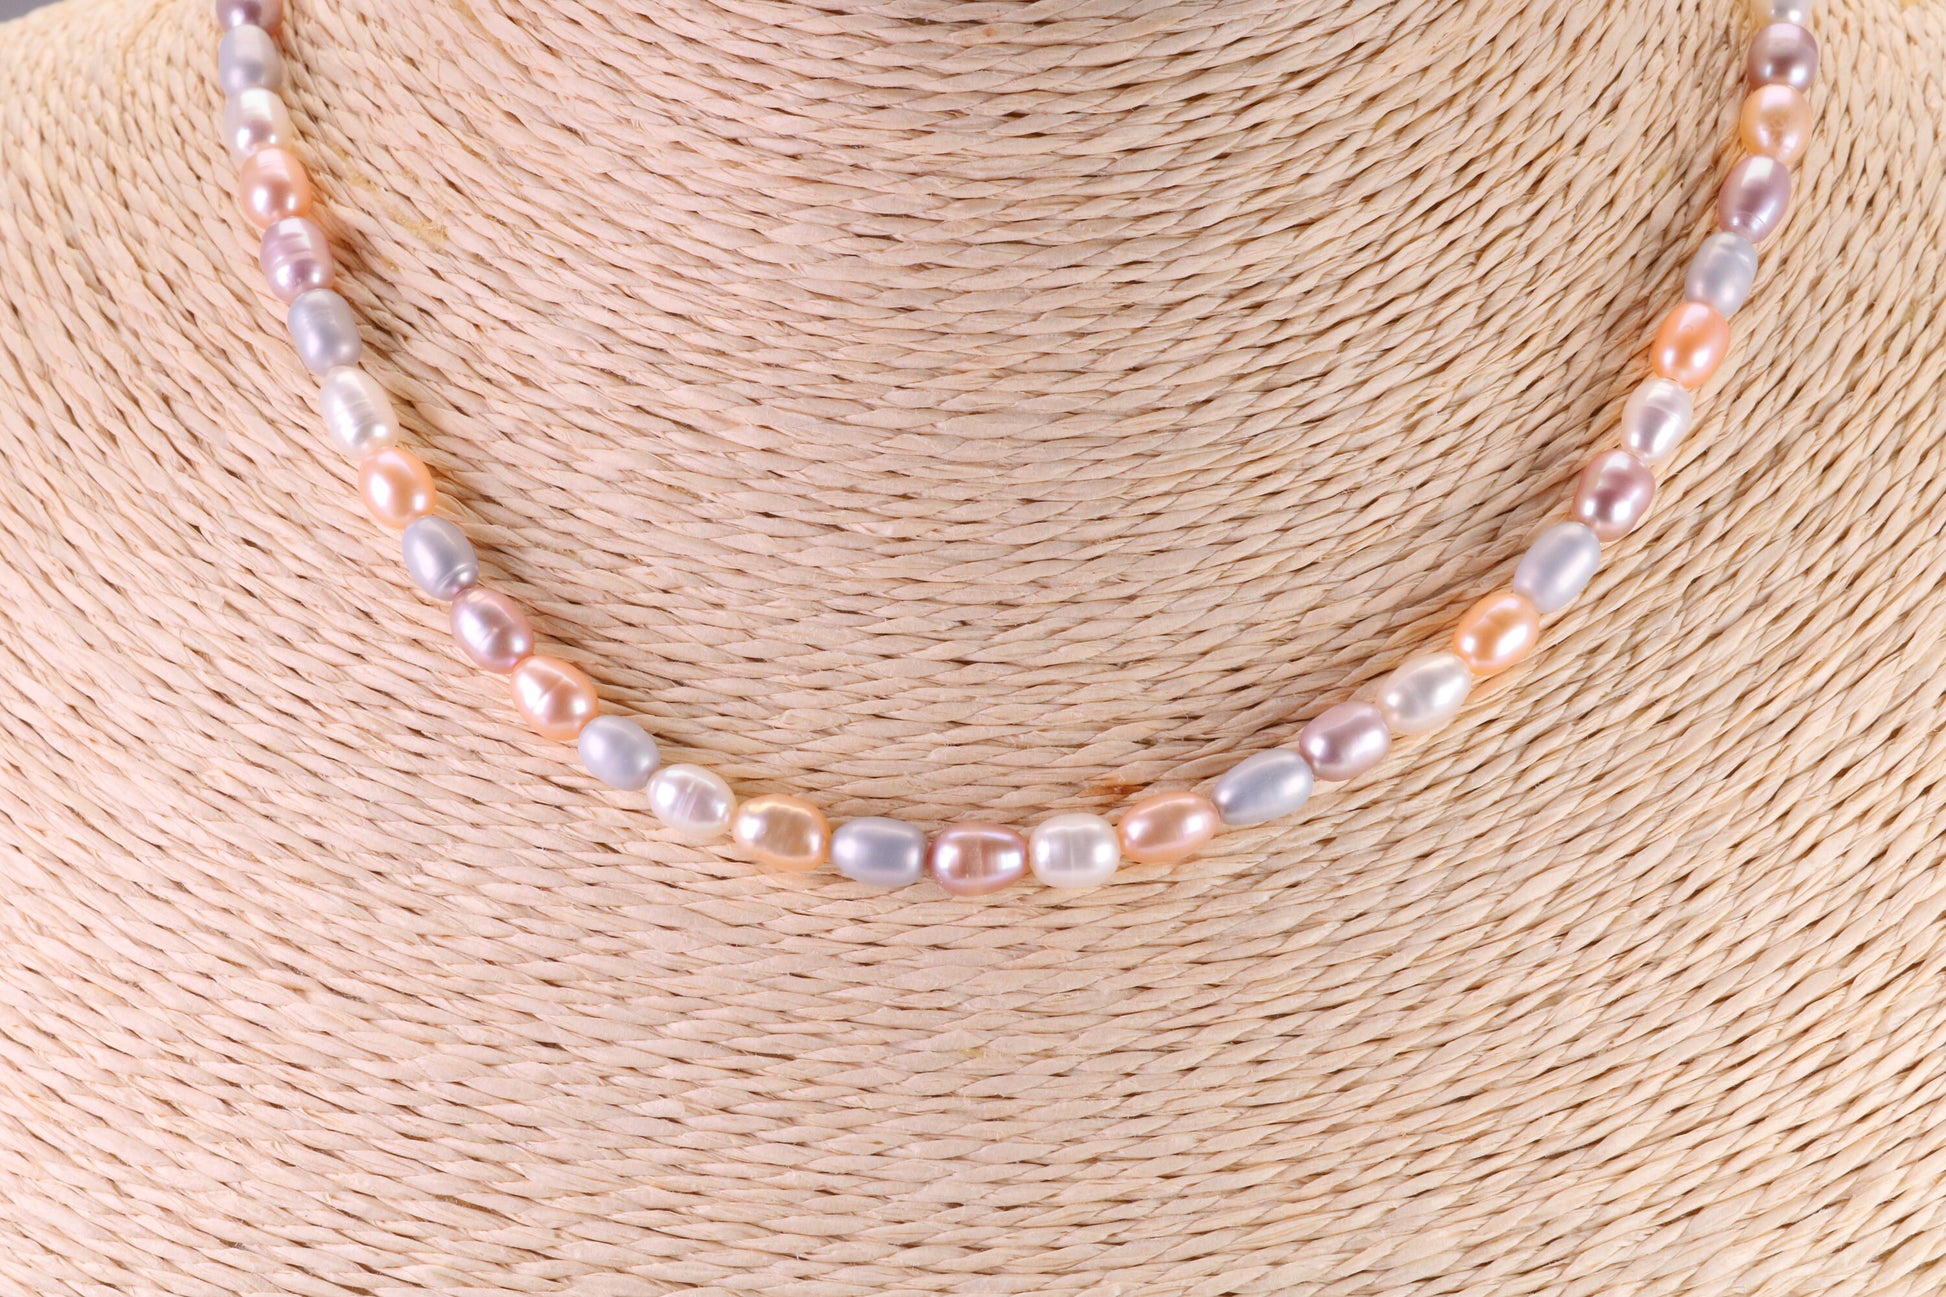 Natural Pastel Coloured 16 Inches Long Single Strand Pearl Necklace set in Silver, 5 mm Oval Pearls, Length Adjustable Necklace